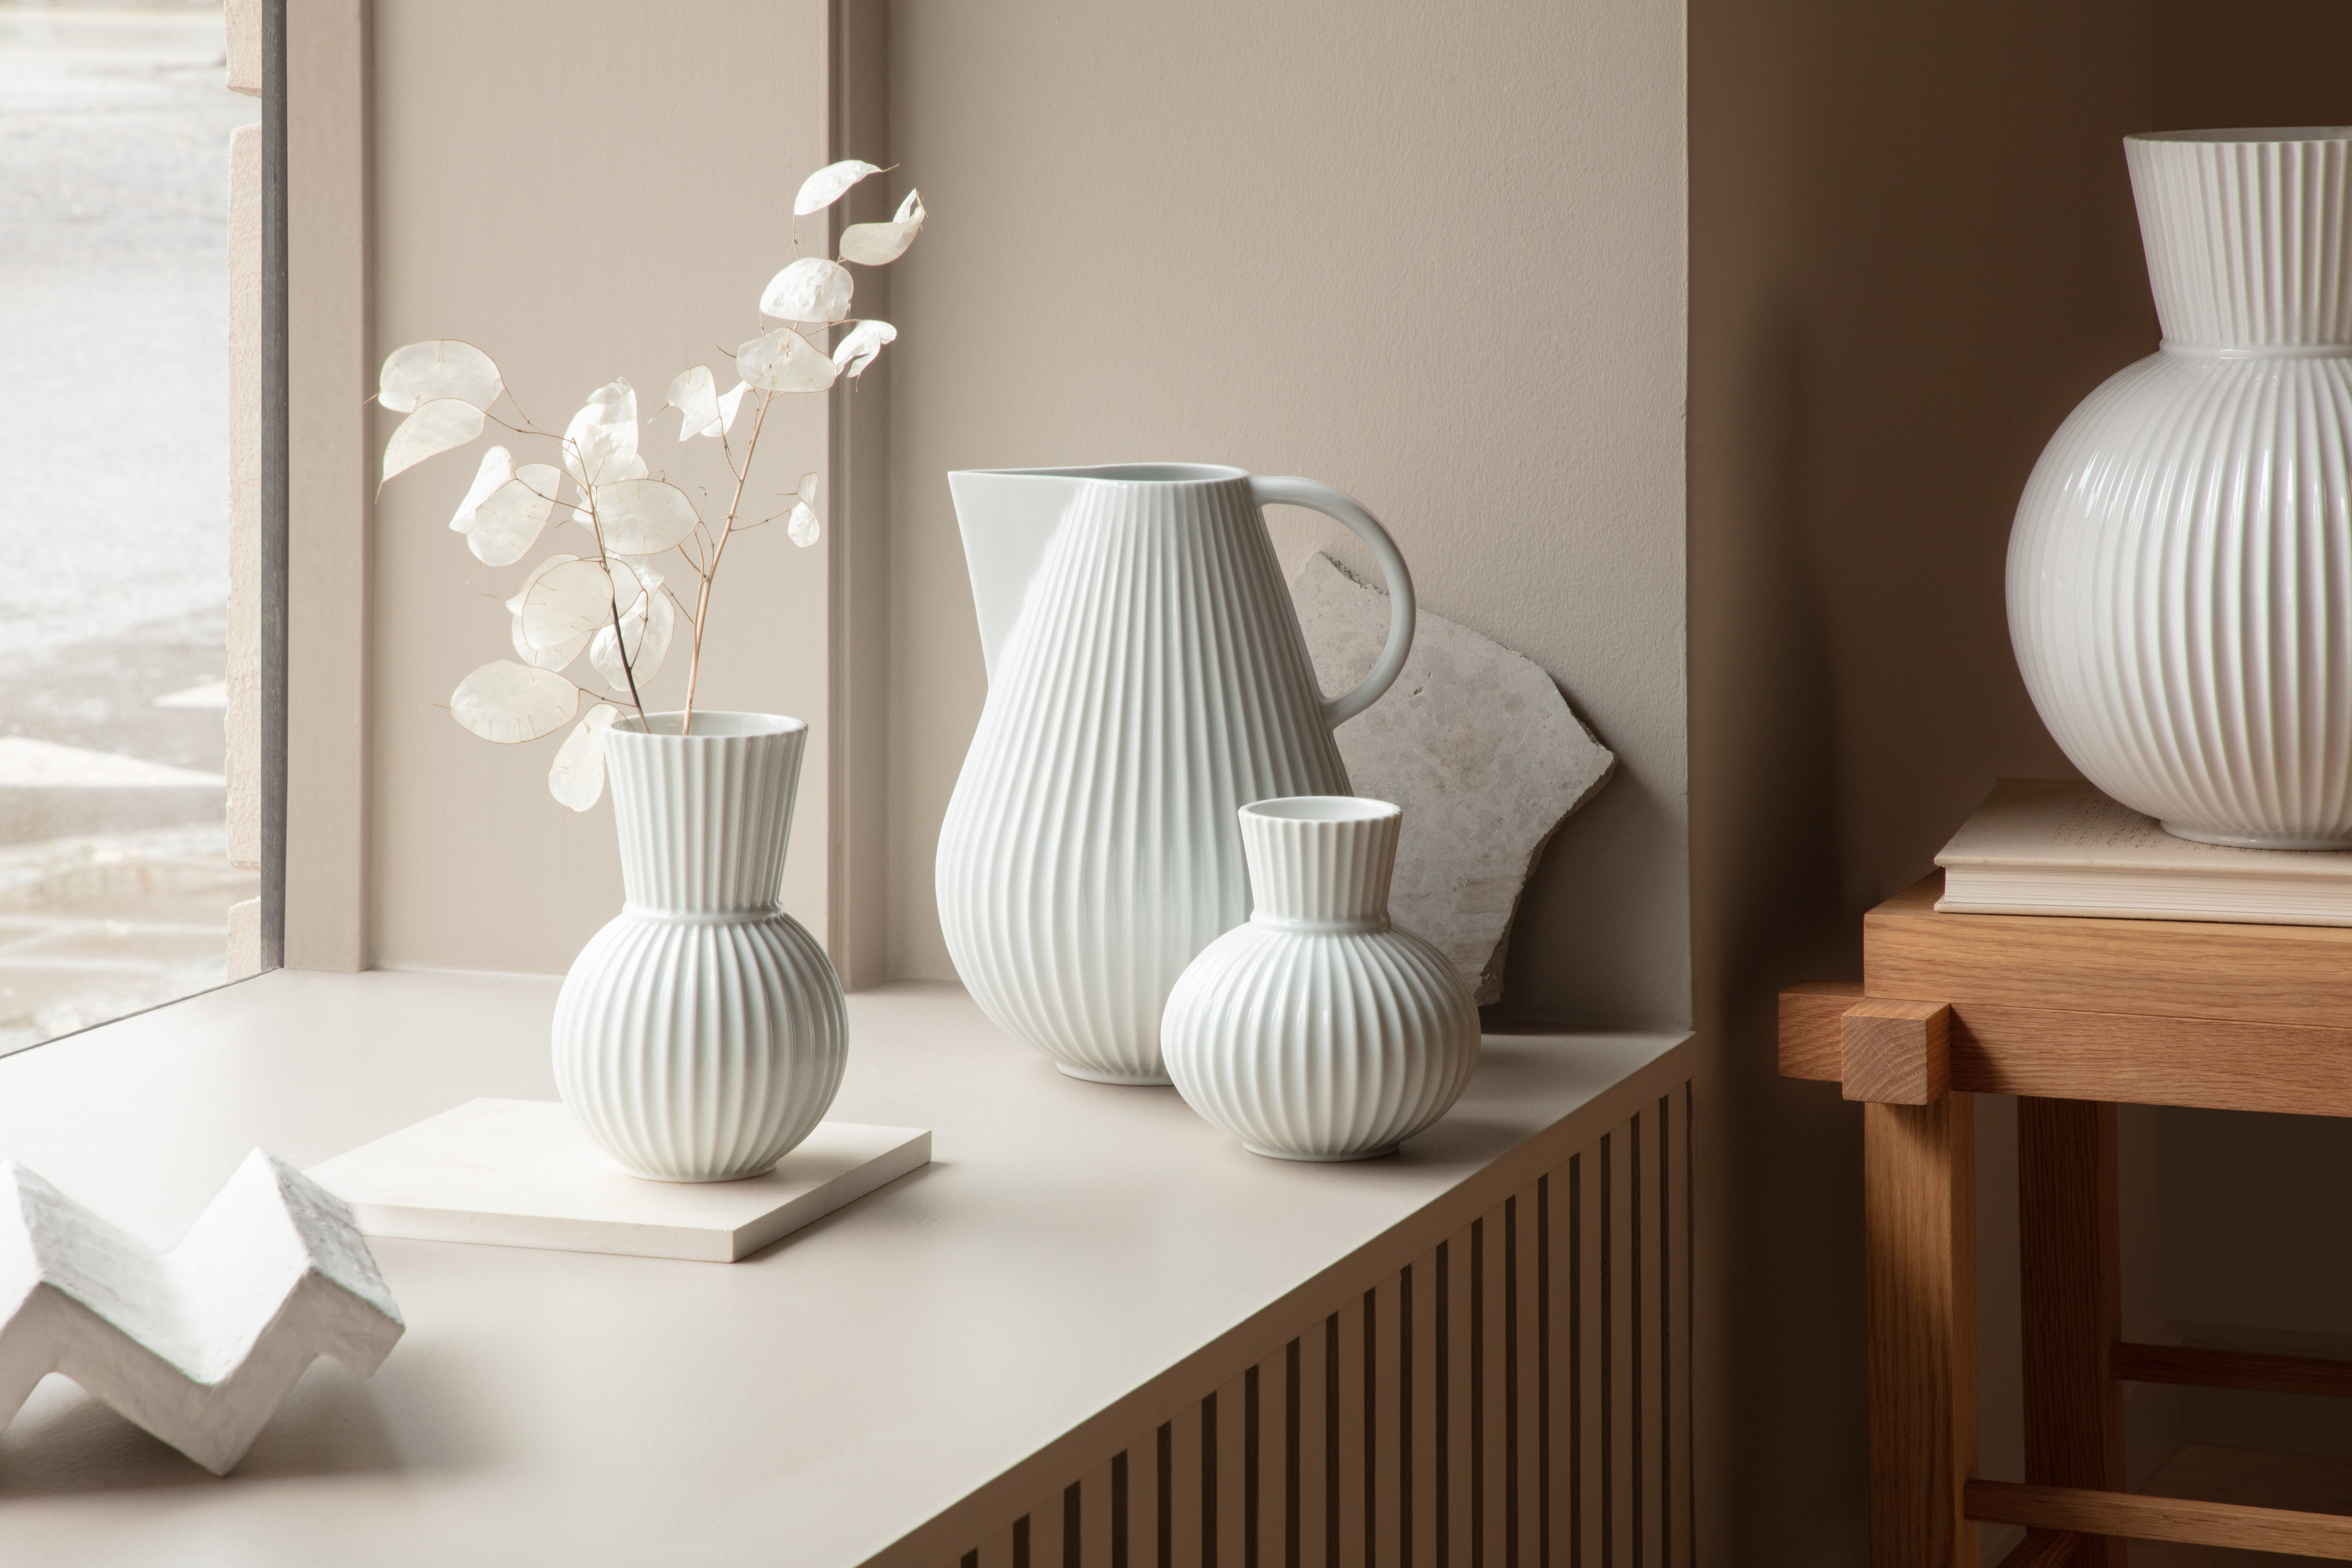 Vases in window sill iTura series from Lyngby Porcelæn